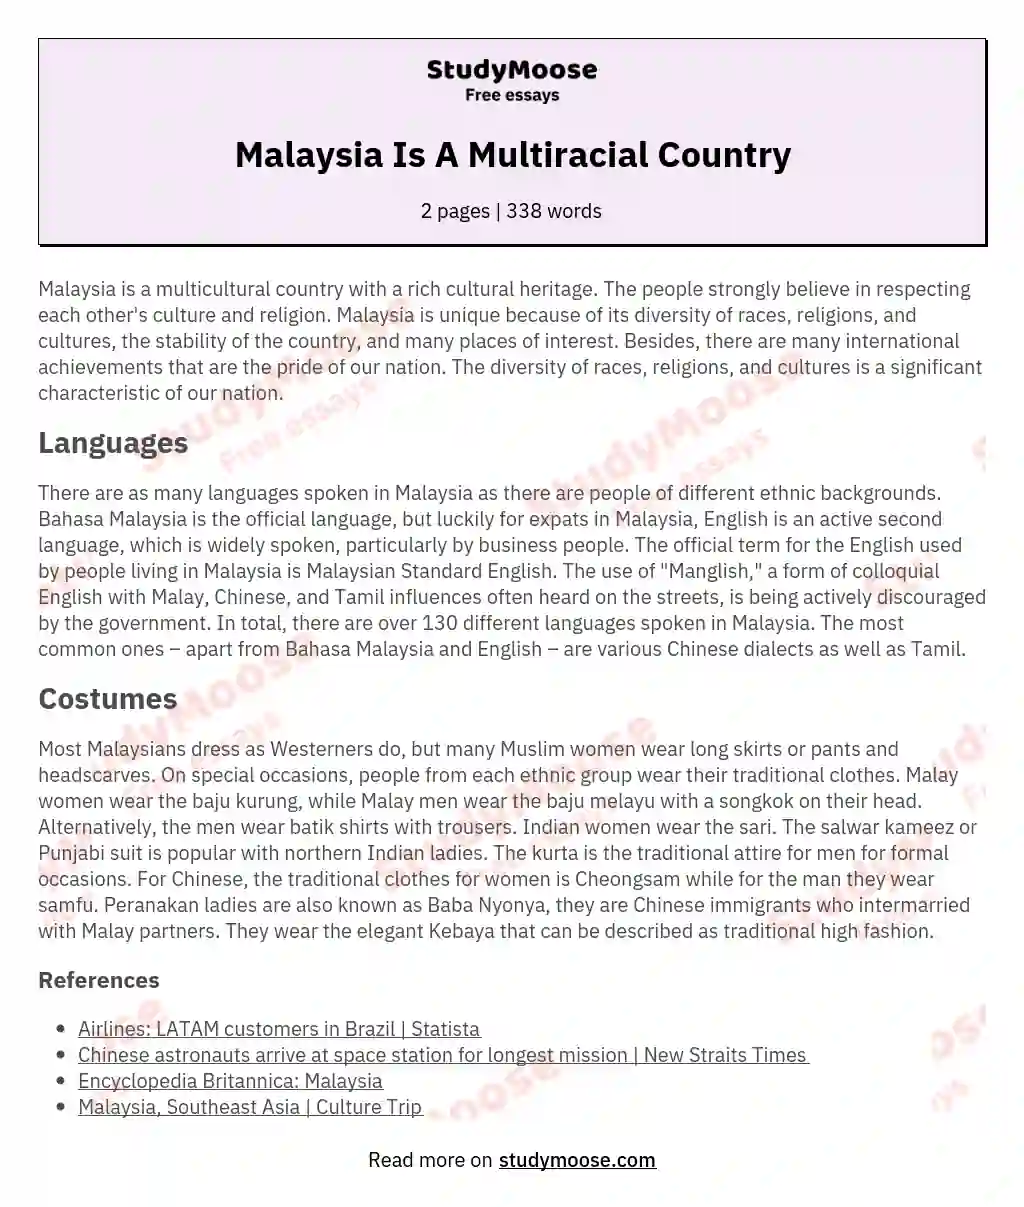 Malaysia Is A Multiracial Country essay